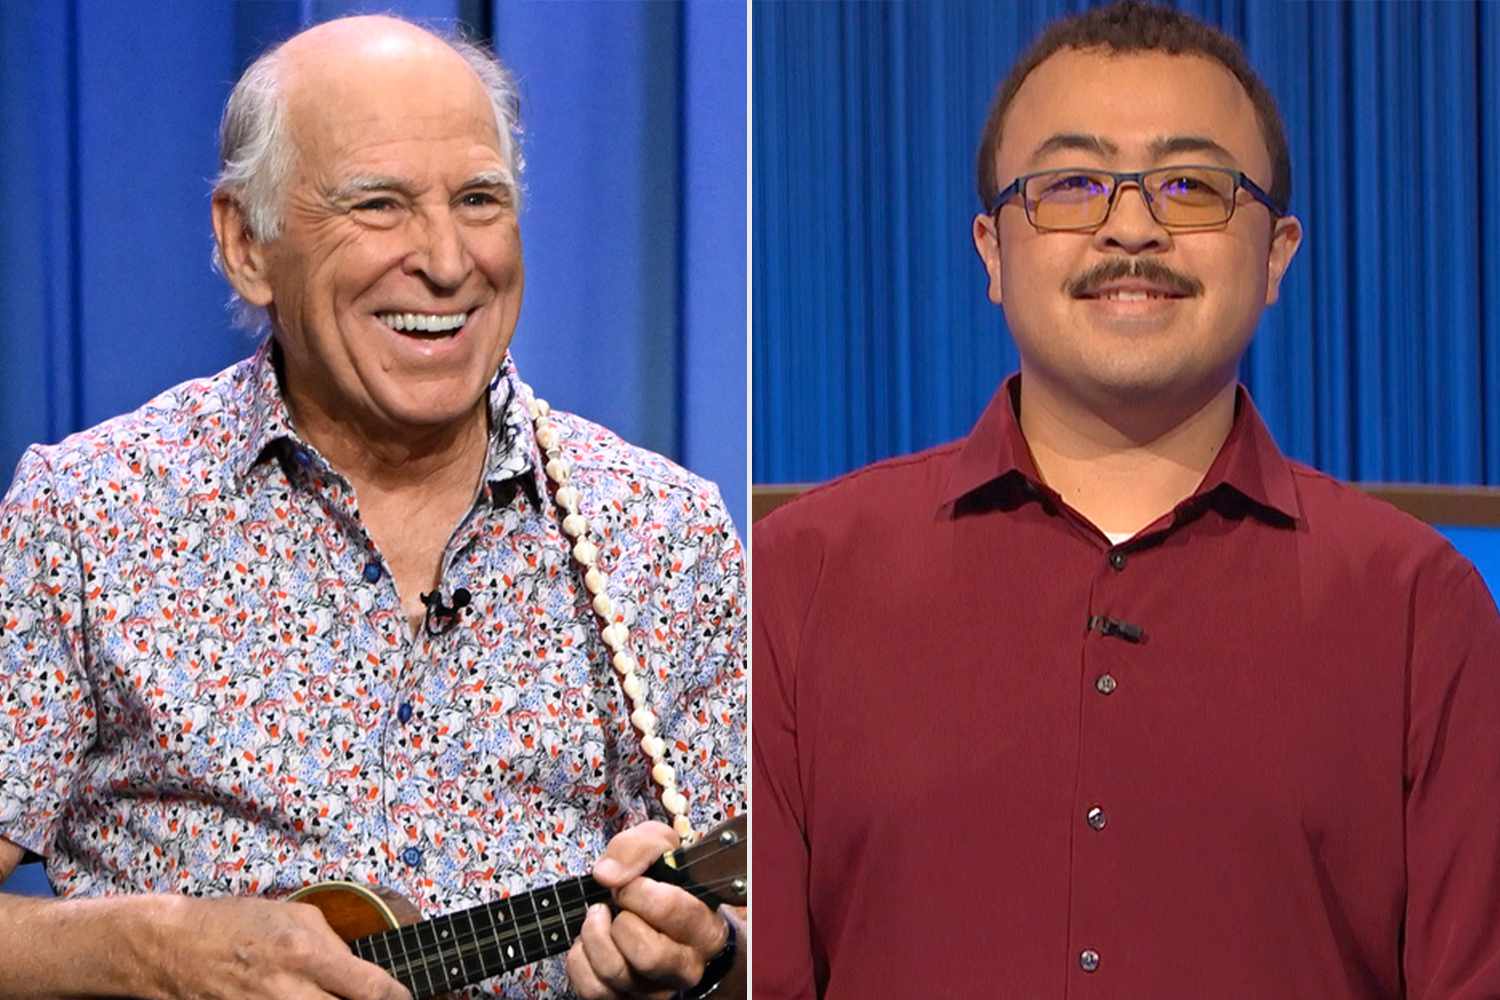 “Jeopardy! ”Contestant Says His Grandmother's Restaurant Inspired Jimmy Buffett’s Song ‘Cheeseburger in Paradise’